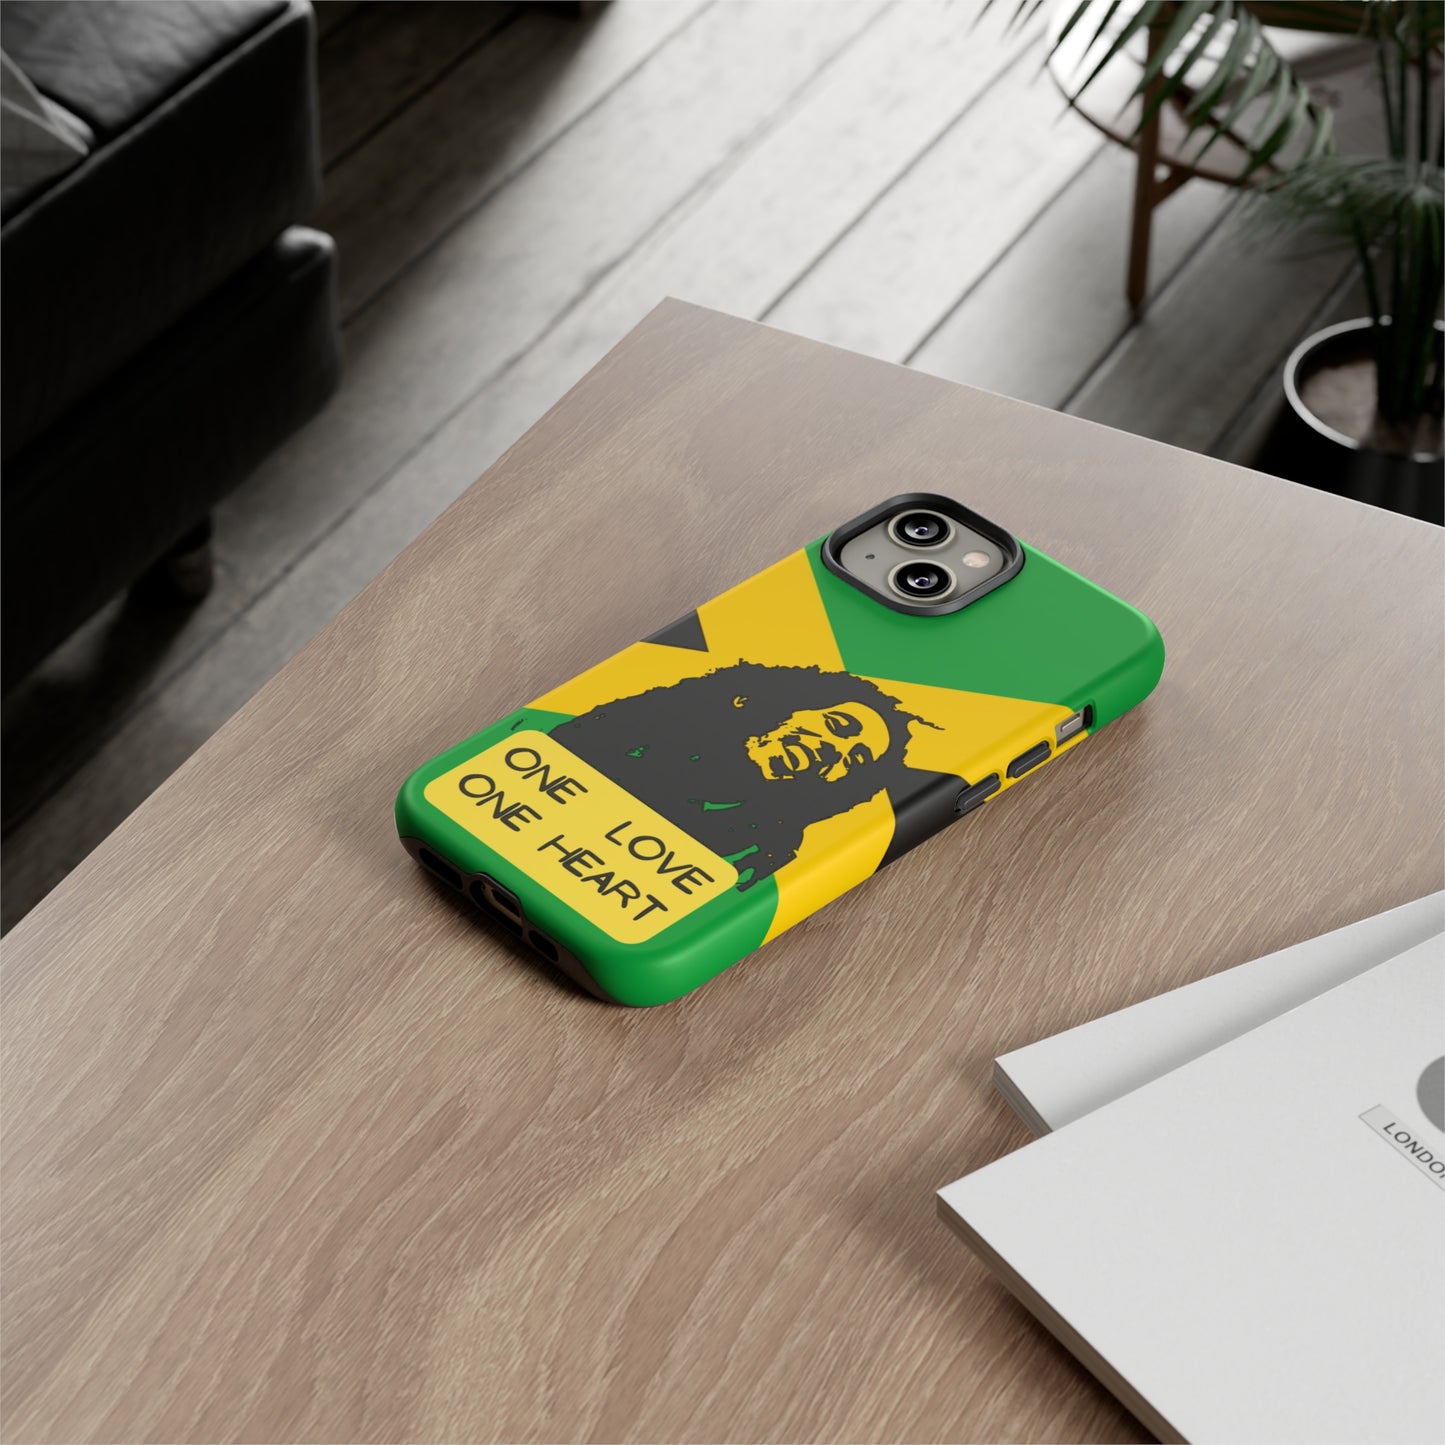 Bob Marley One Love | Mostly Android Phone Cases | MAC